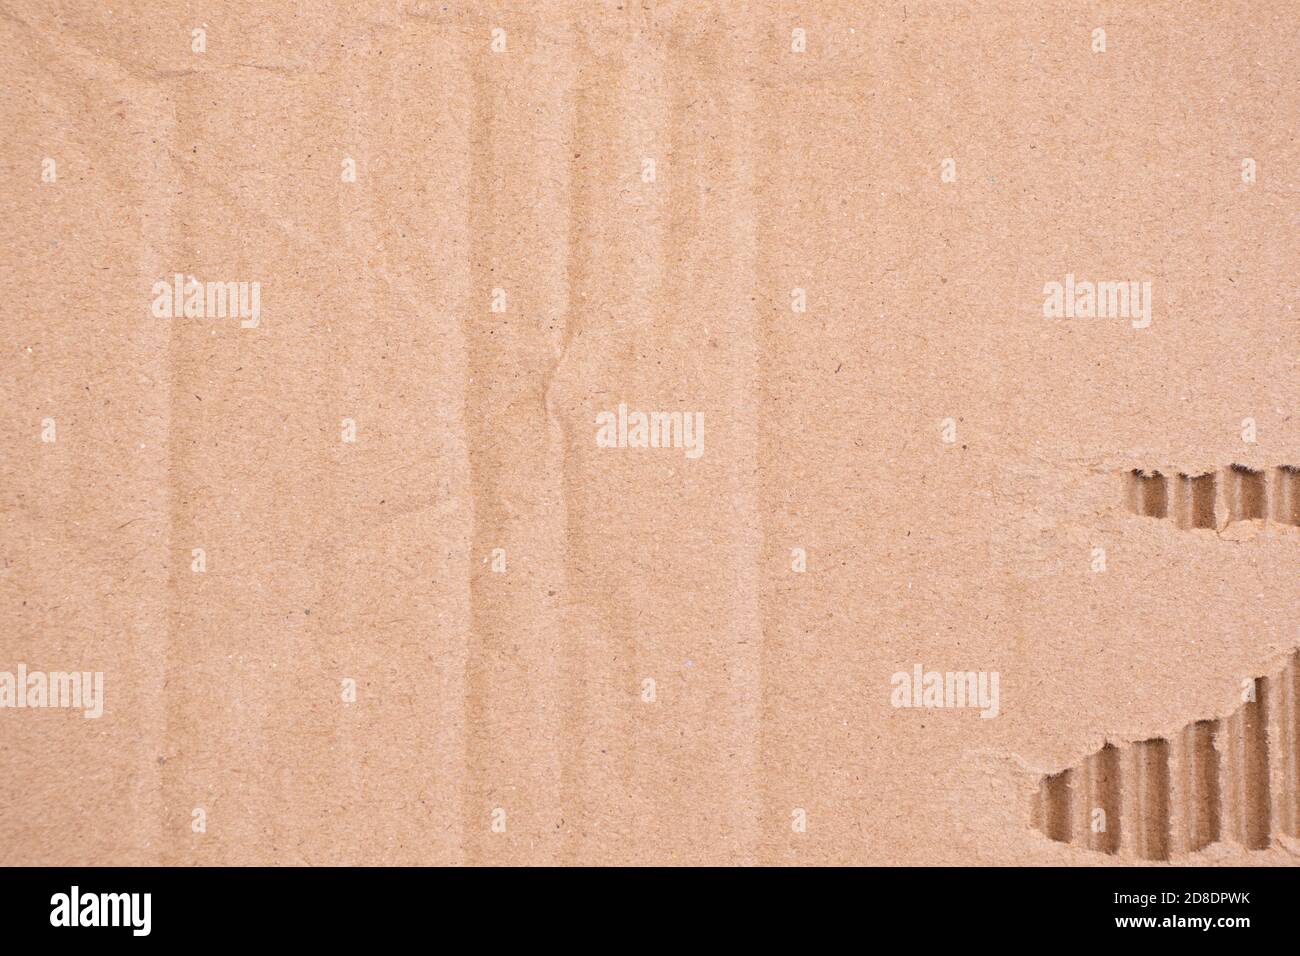 Brown Craft Paper for Background Stock Photo - Image of design